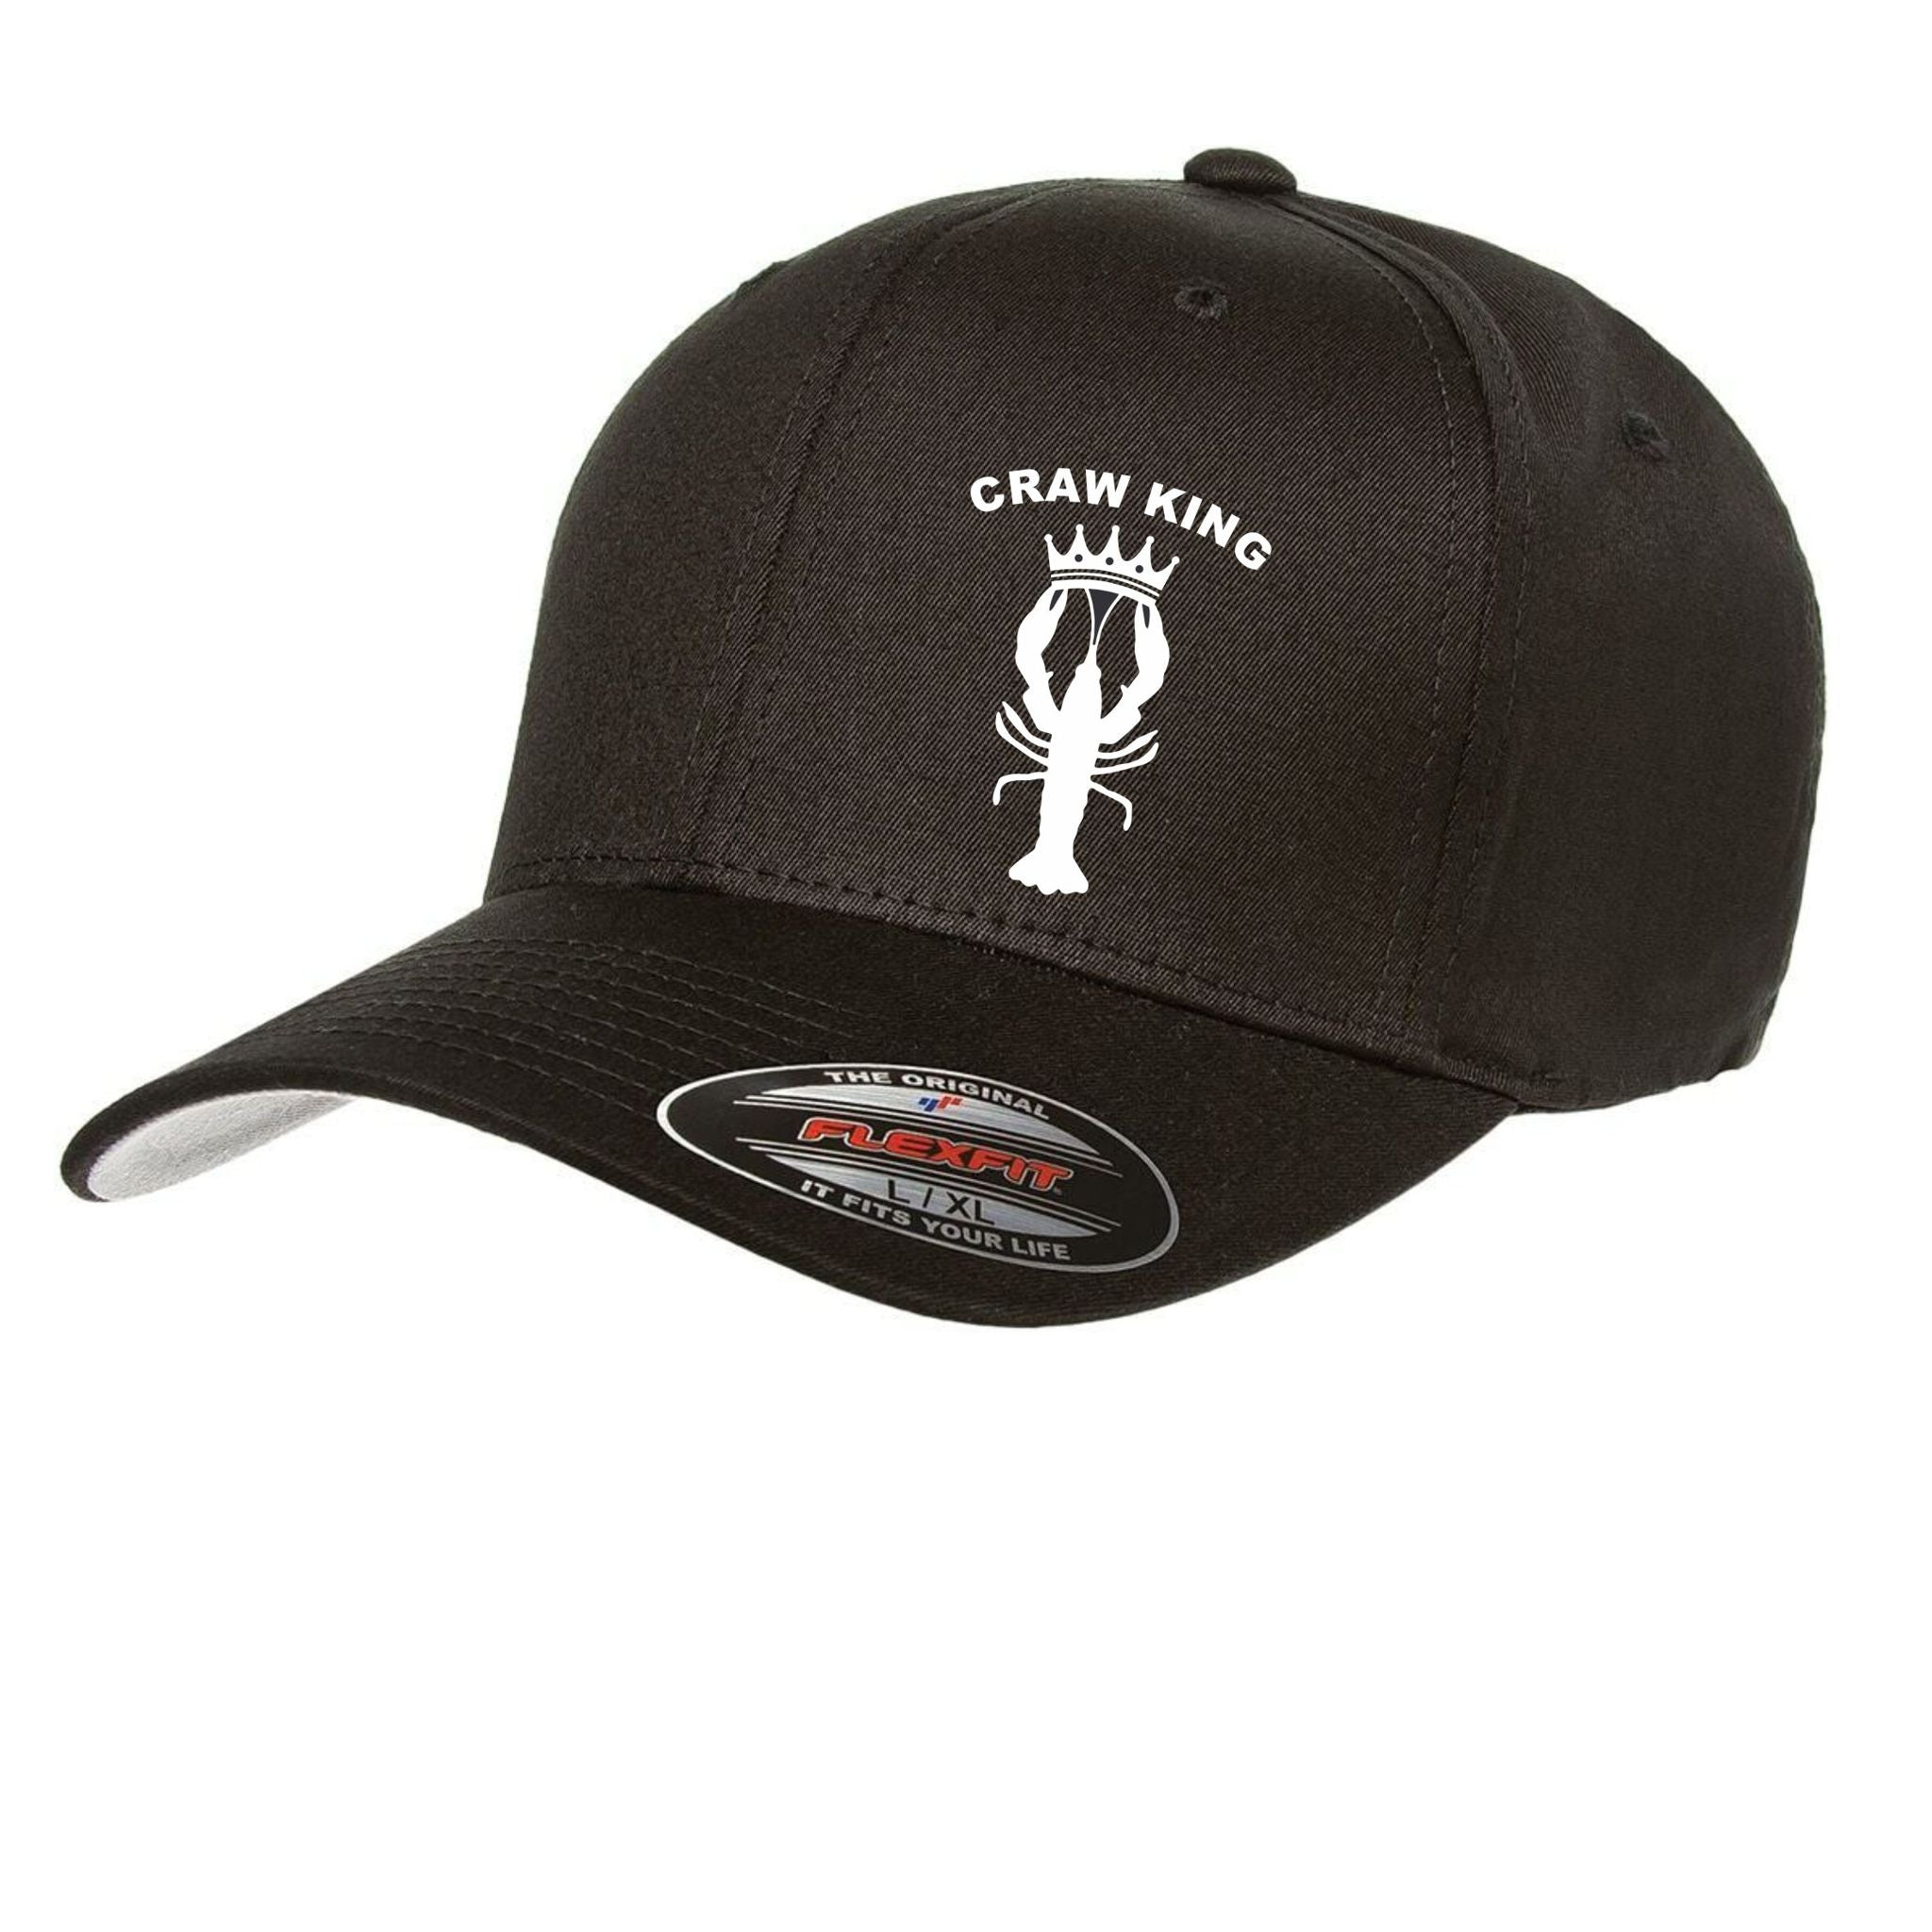 Craw King Flex Fit Hat - Comfortable and Stylish